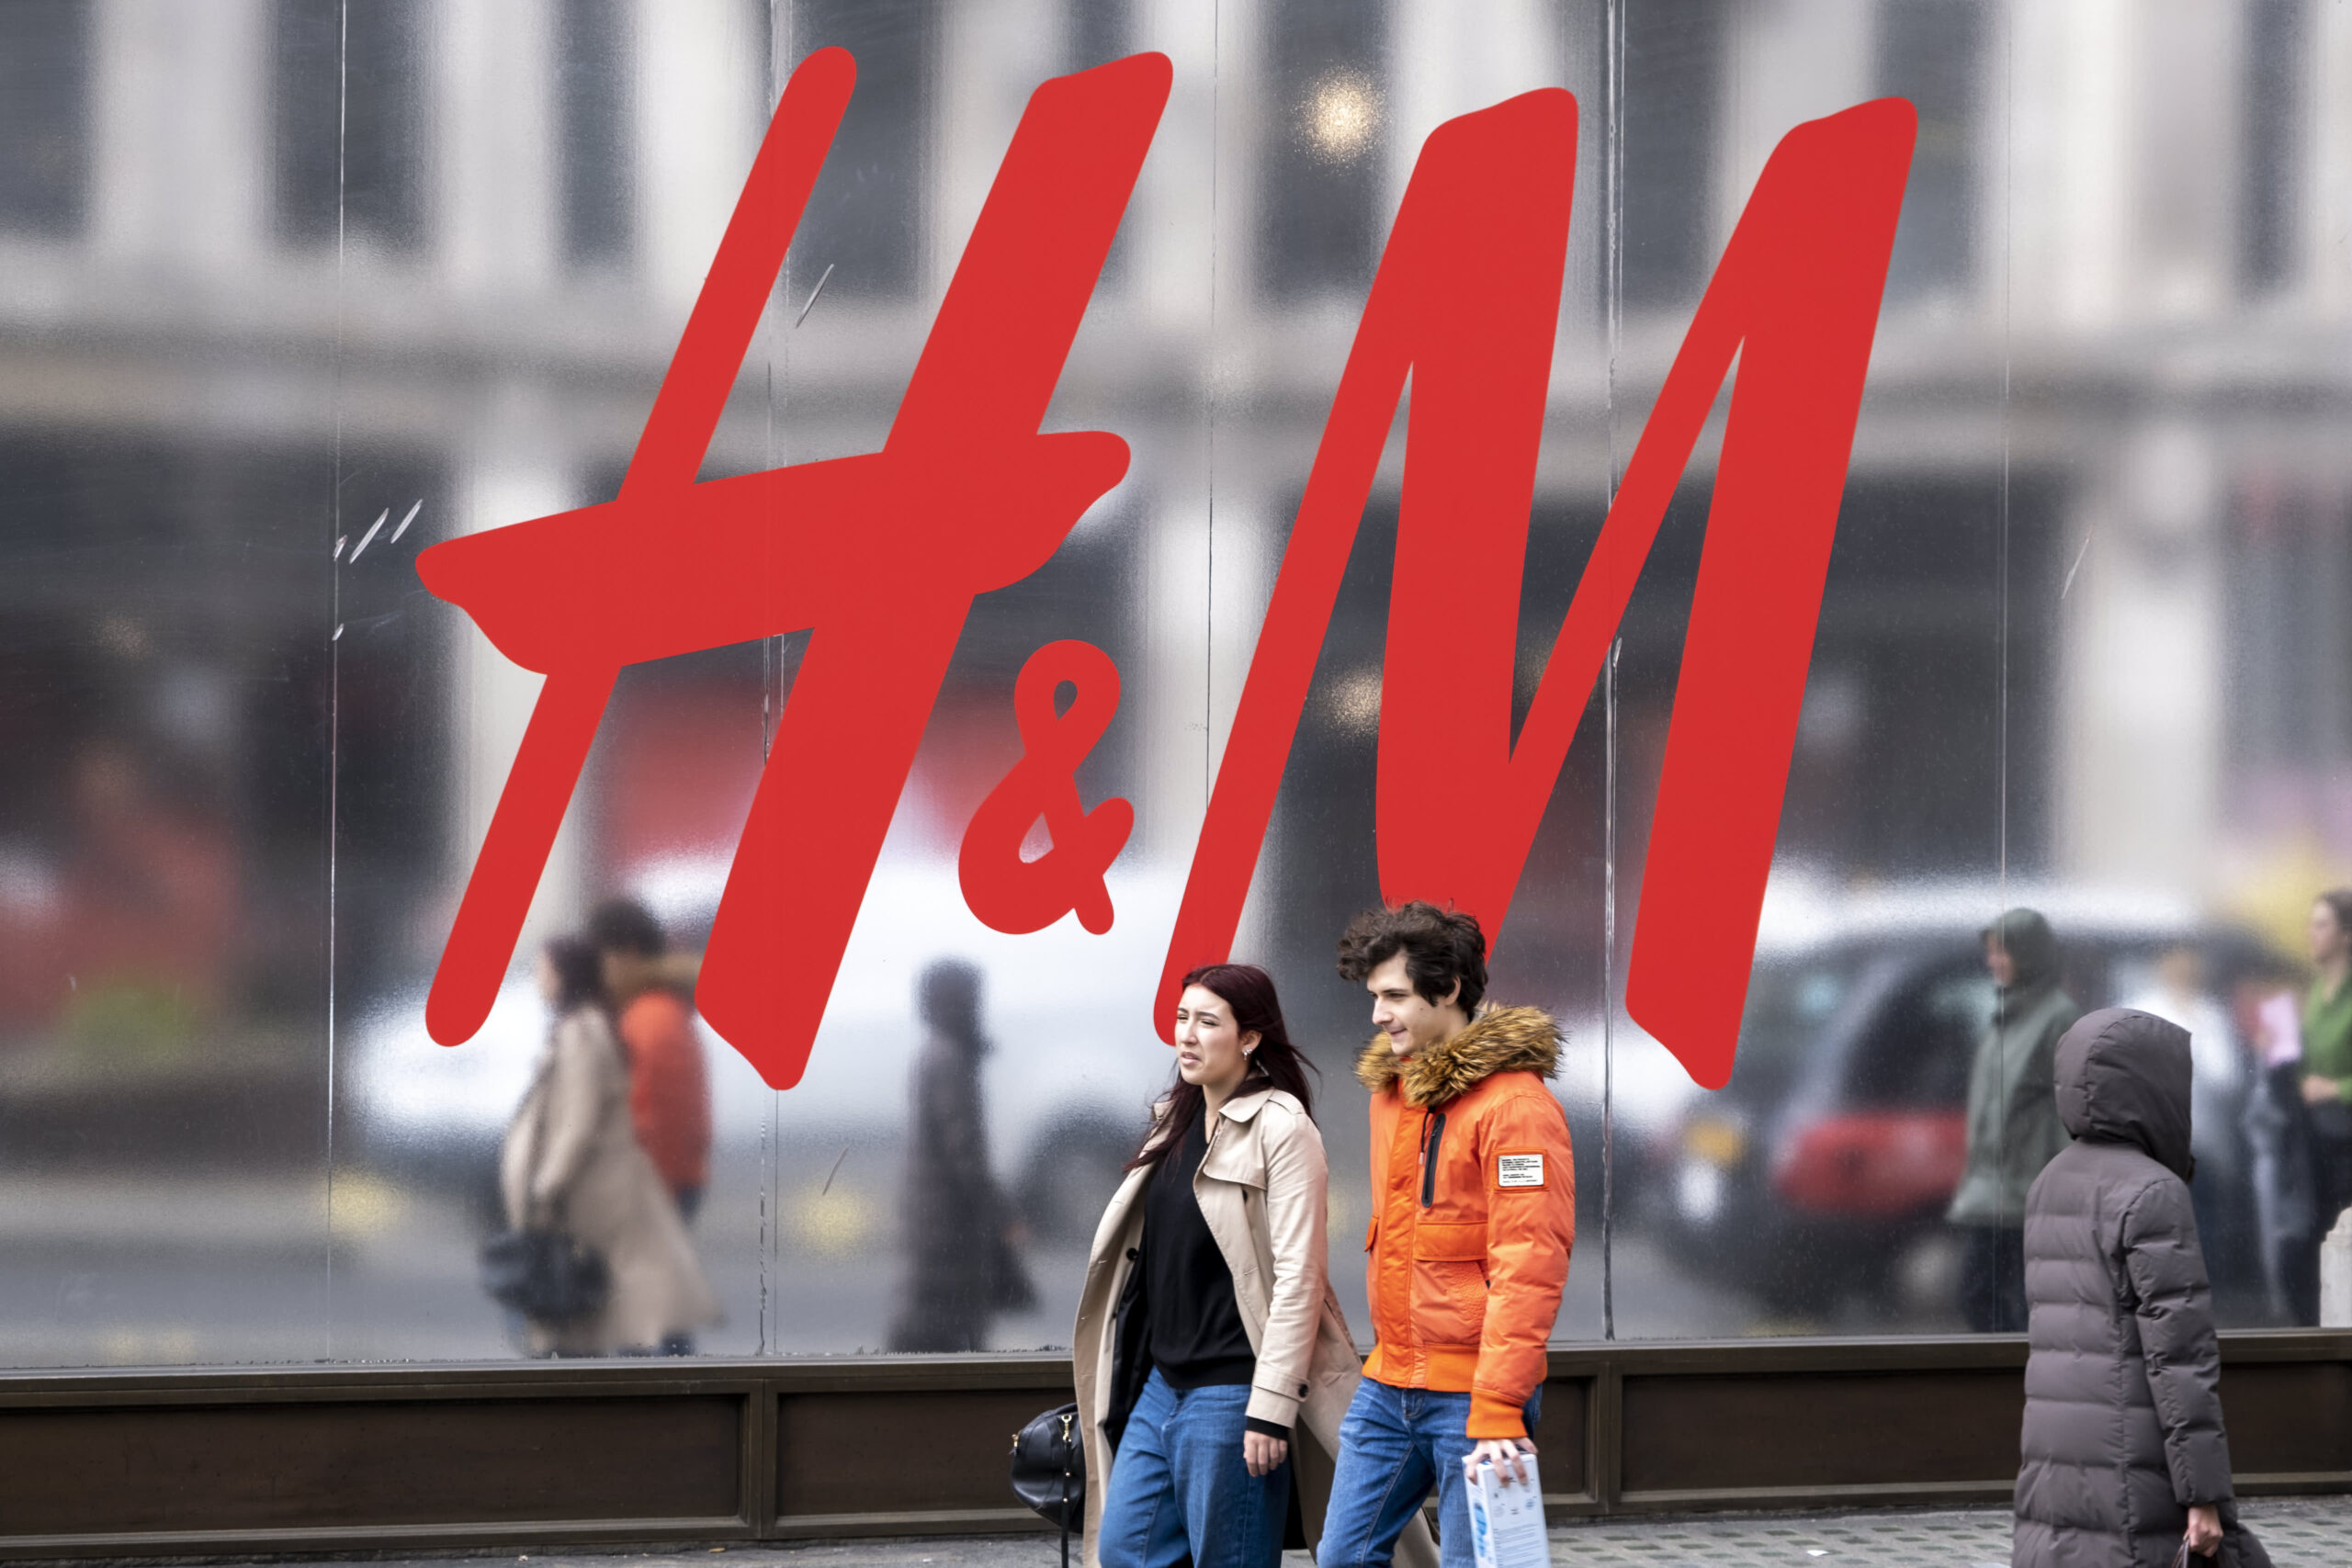 H&M Makes Strides in Promoting Transparency by Listing Supplier